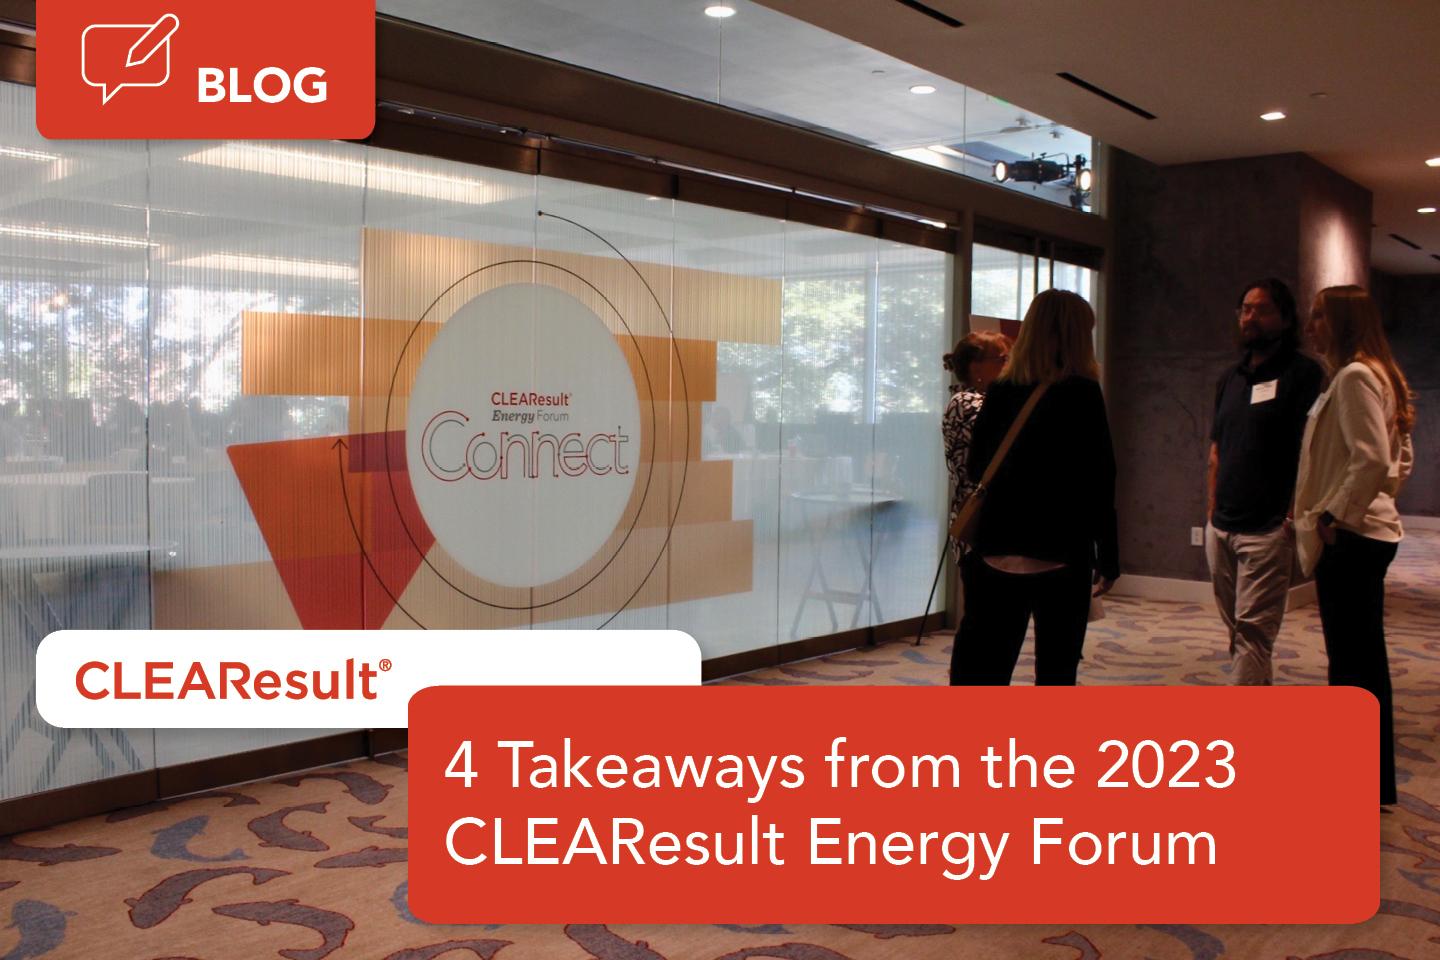 Top takeaways from 2023 CLEAResult Energy Forum